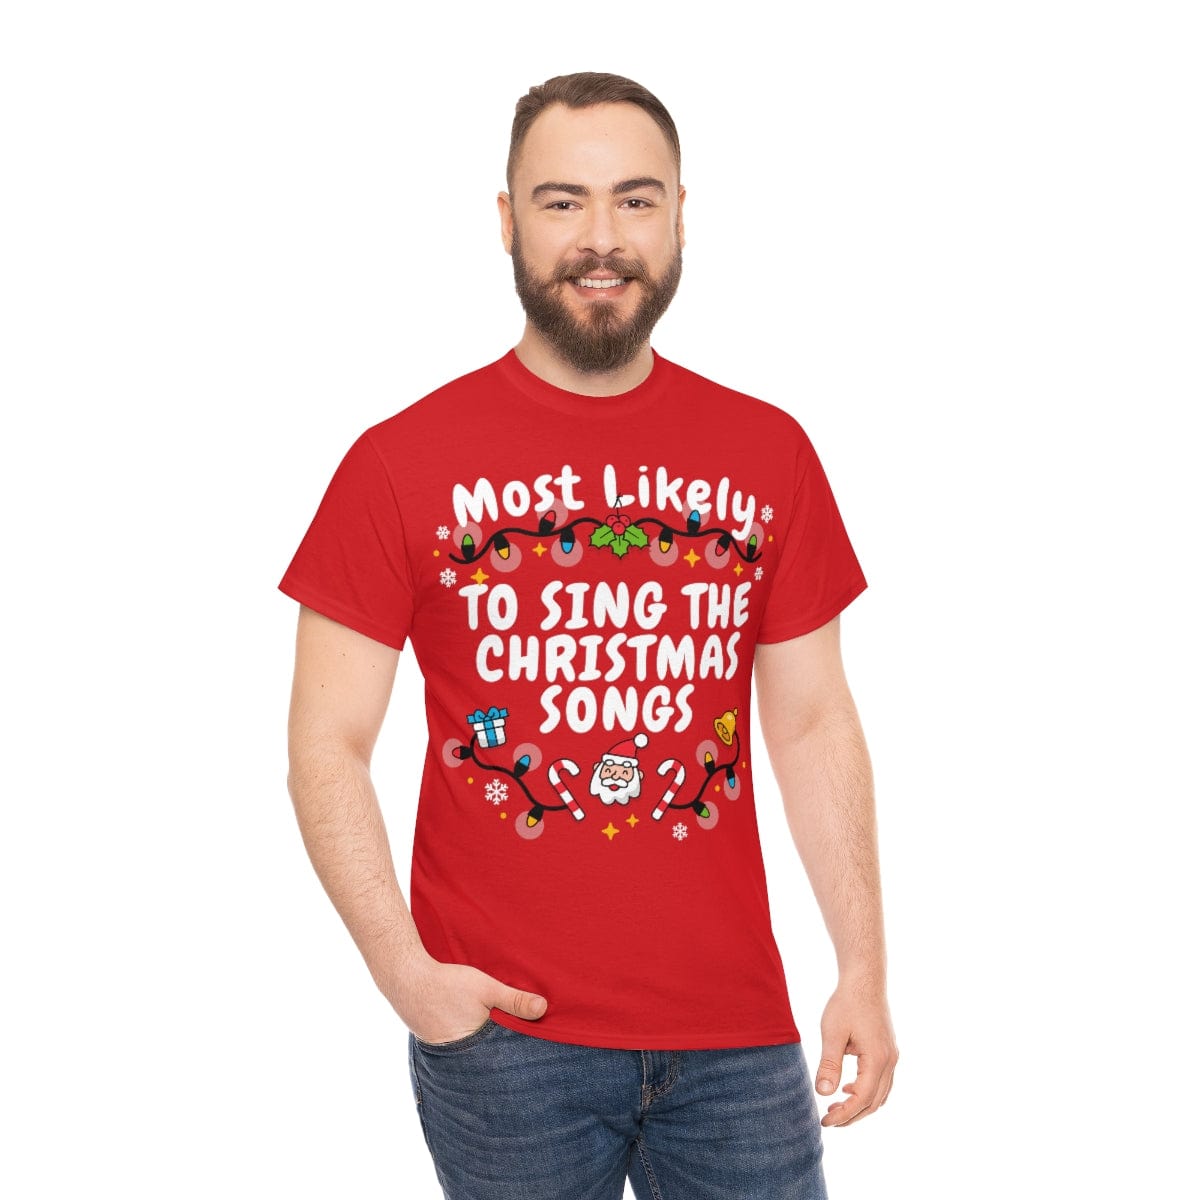 TO SING THE CHRISTMAS SONGS